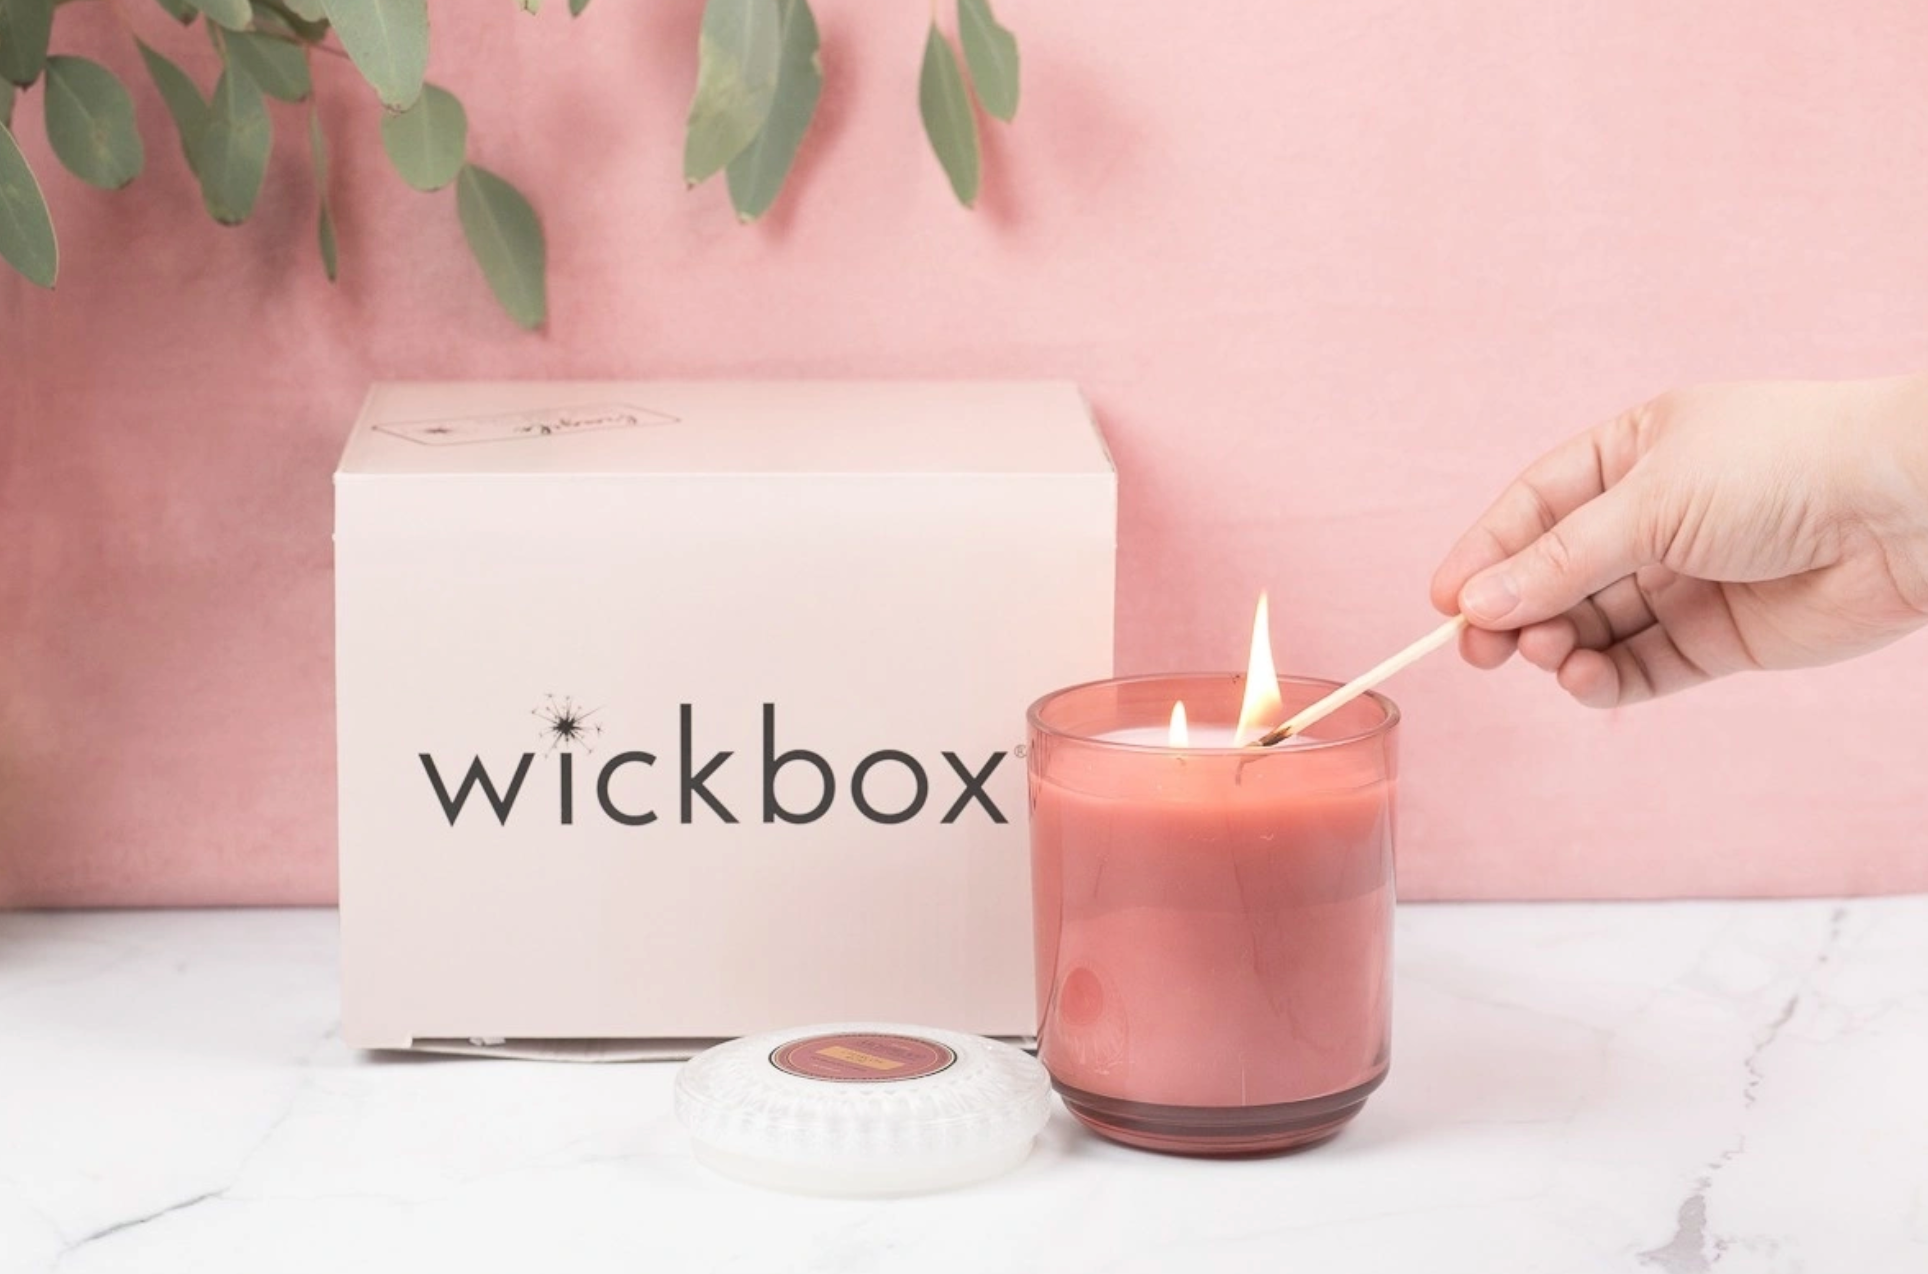 person lighting candle with wickbox box in the background